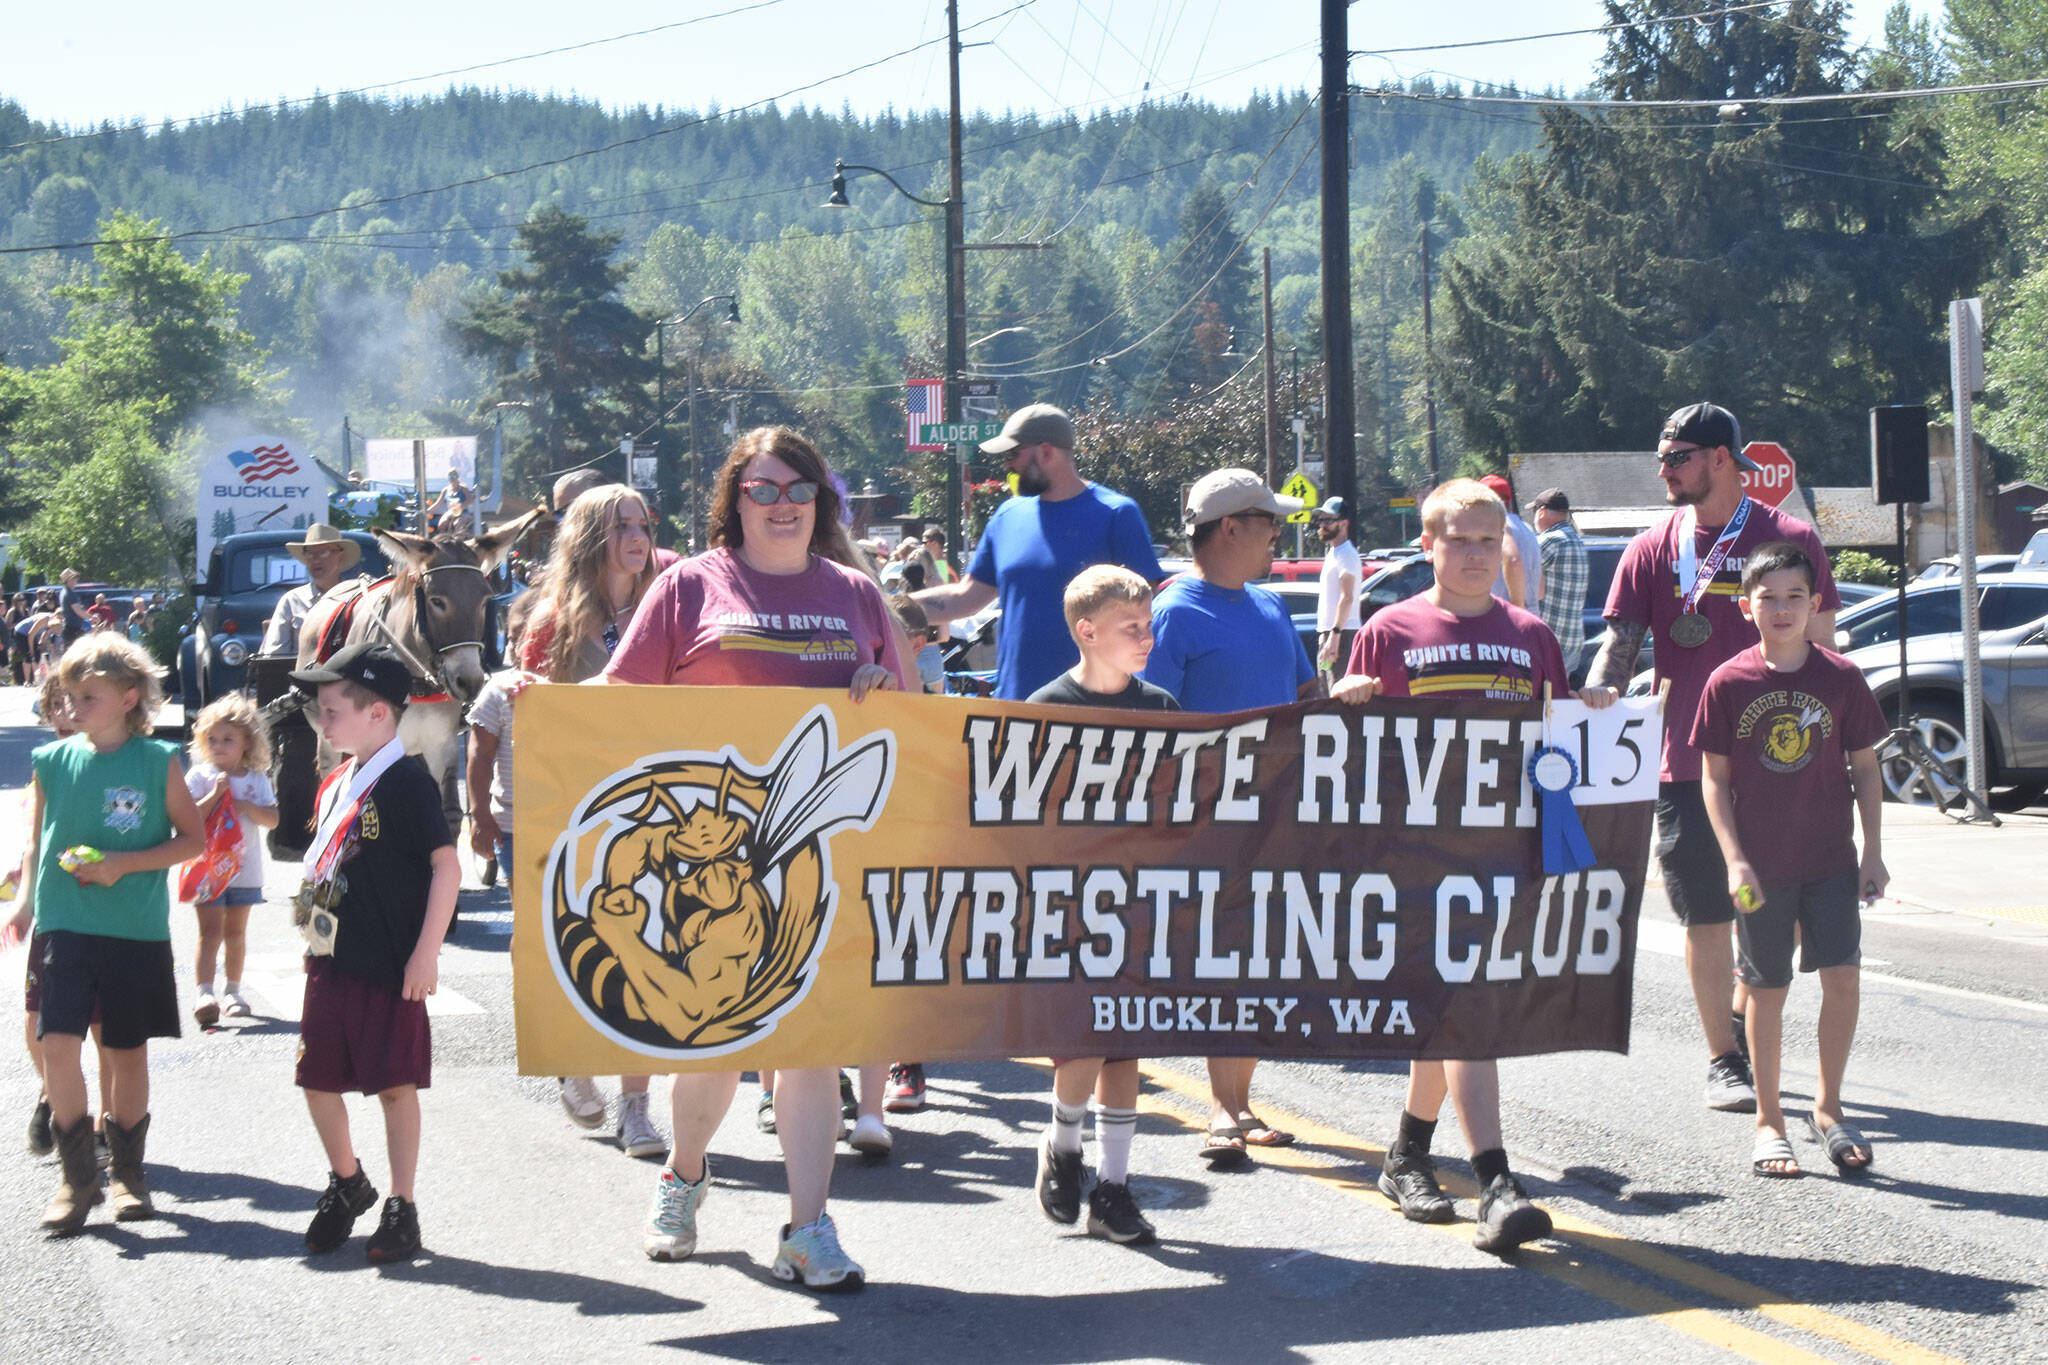 The White River Wrestling Club made an appearance during the parade. Photo by Alex Bruell